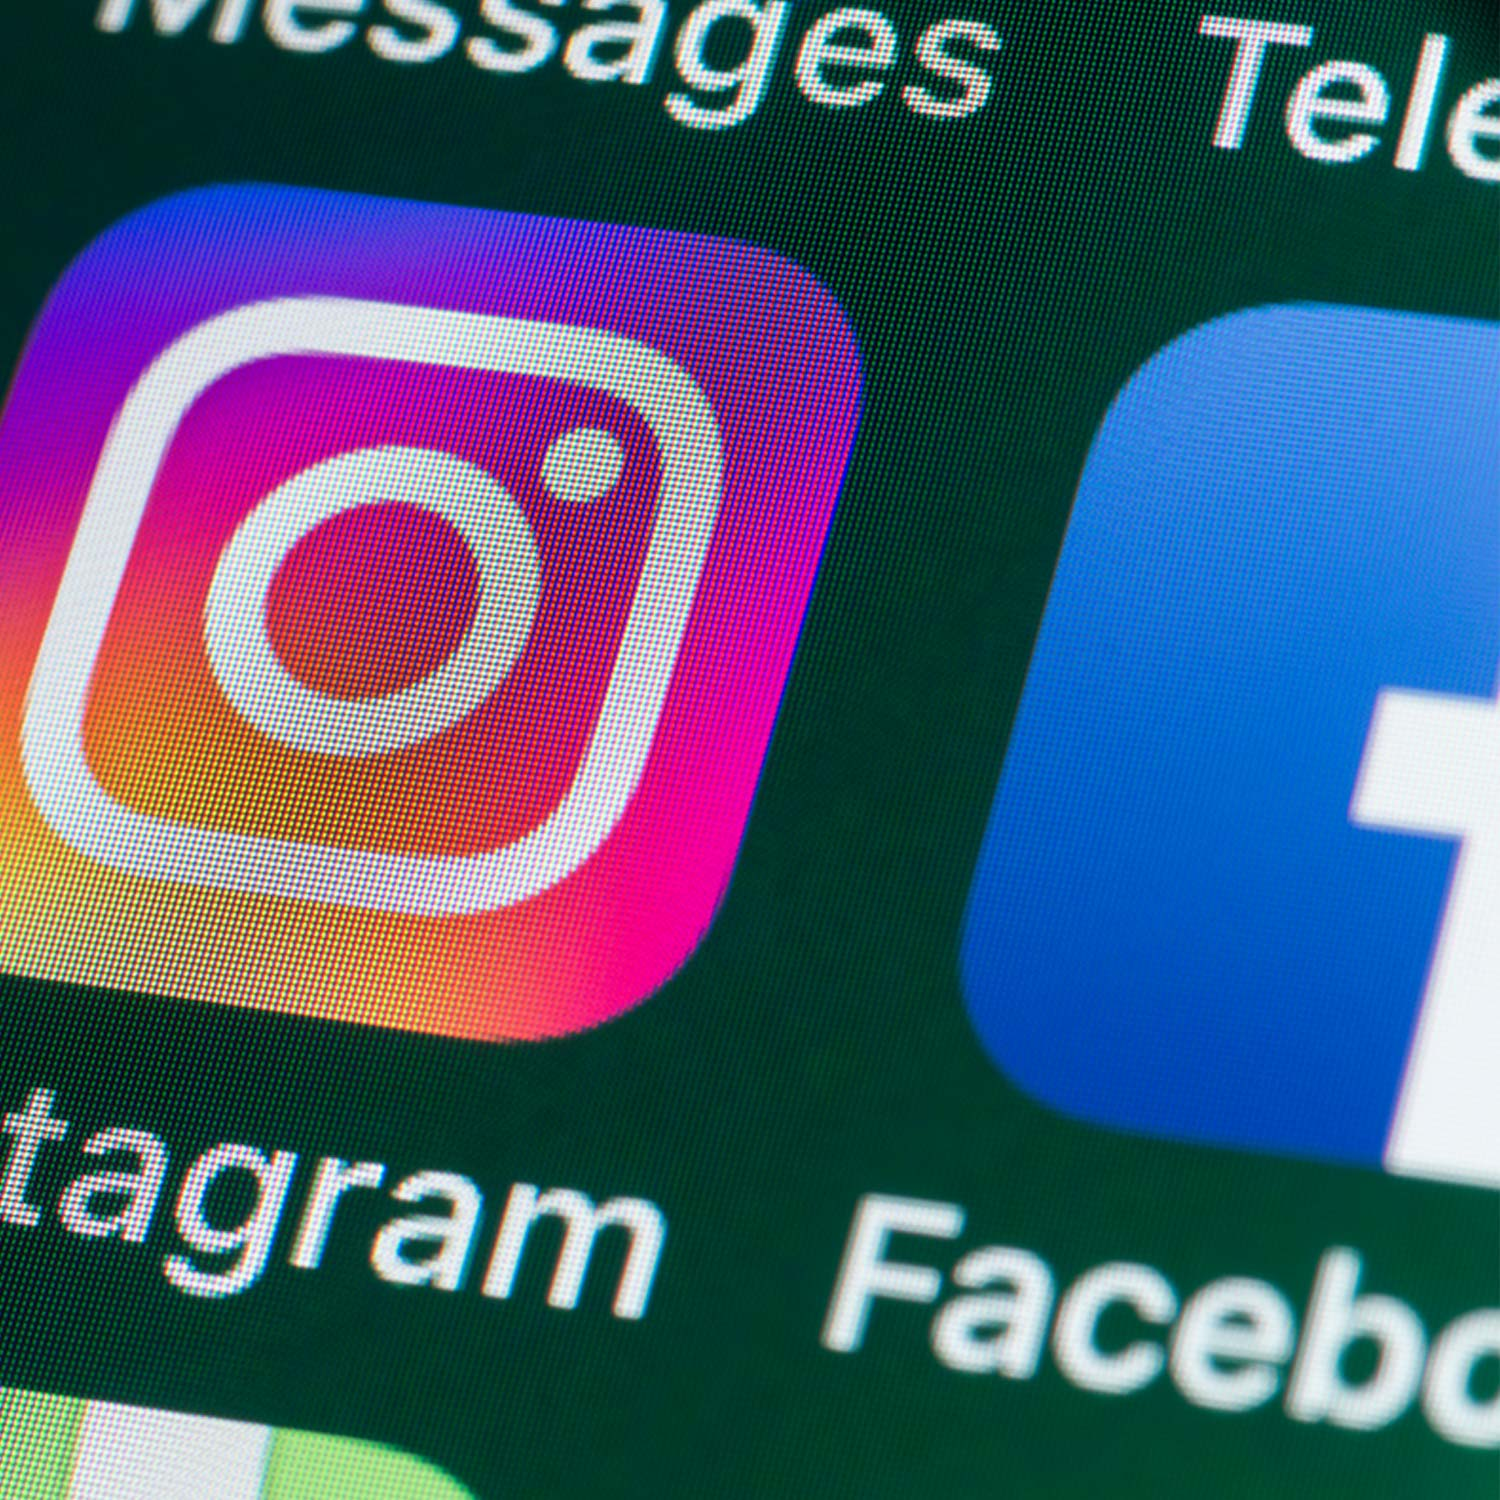 Tech expert says two things could be behind the Facebook, Instagram and WhatsApp outages